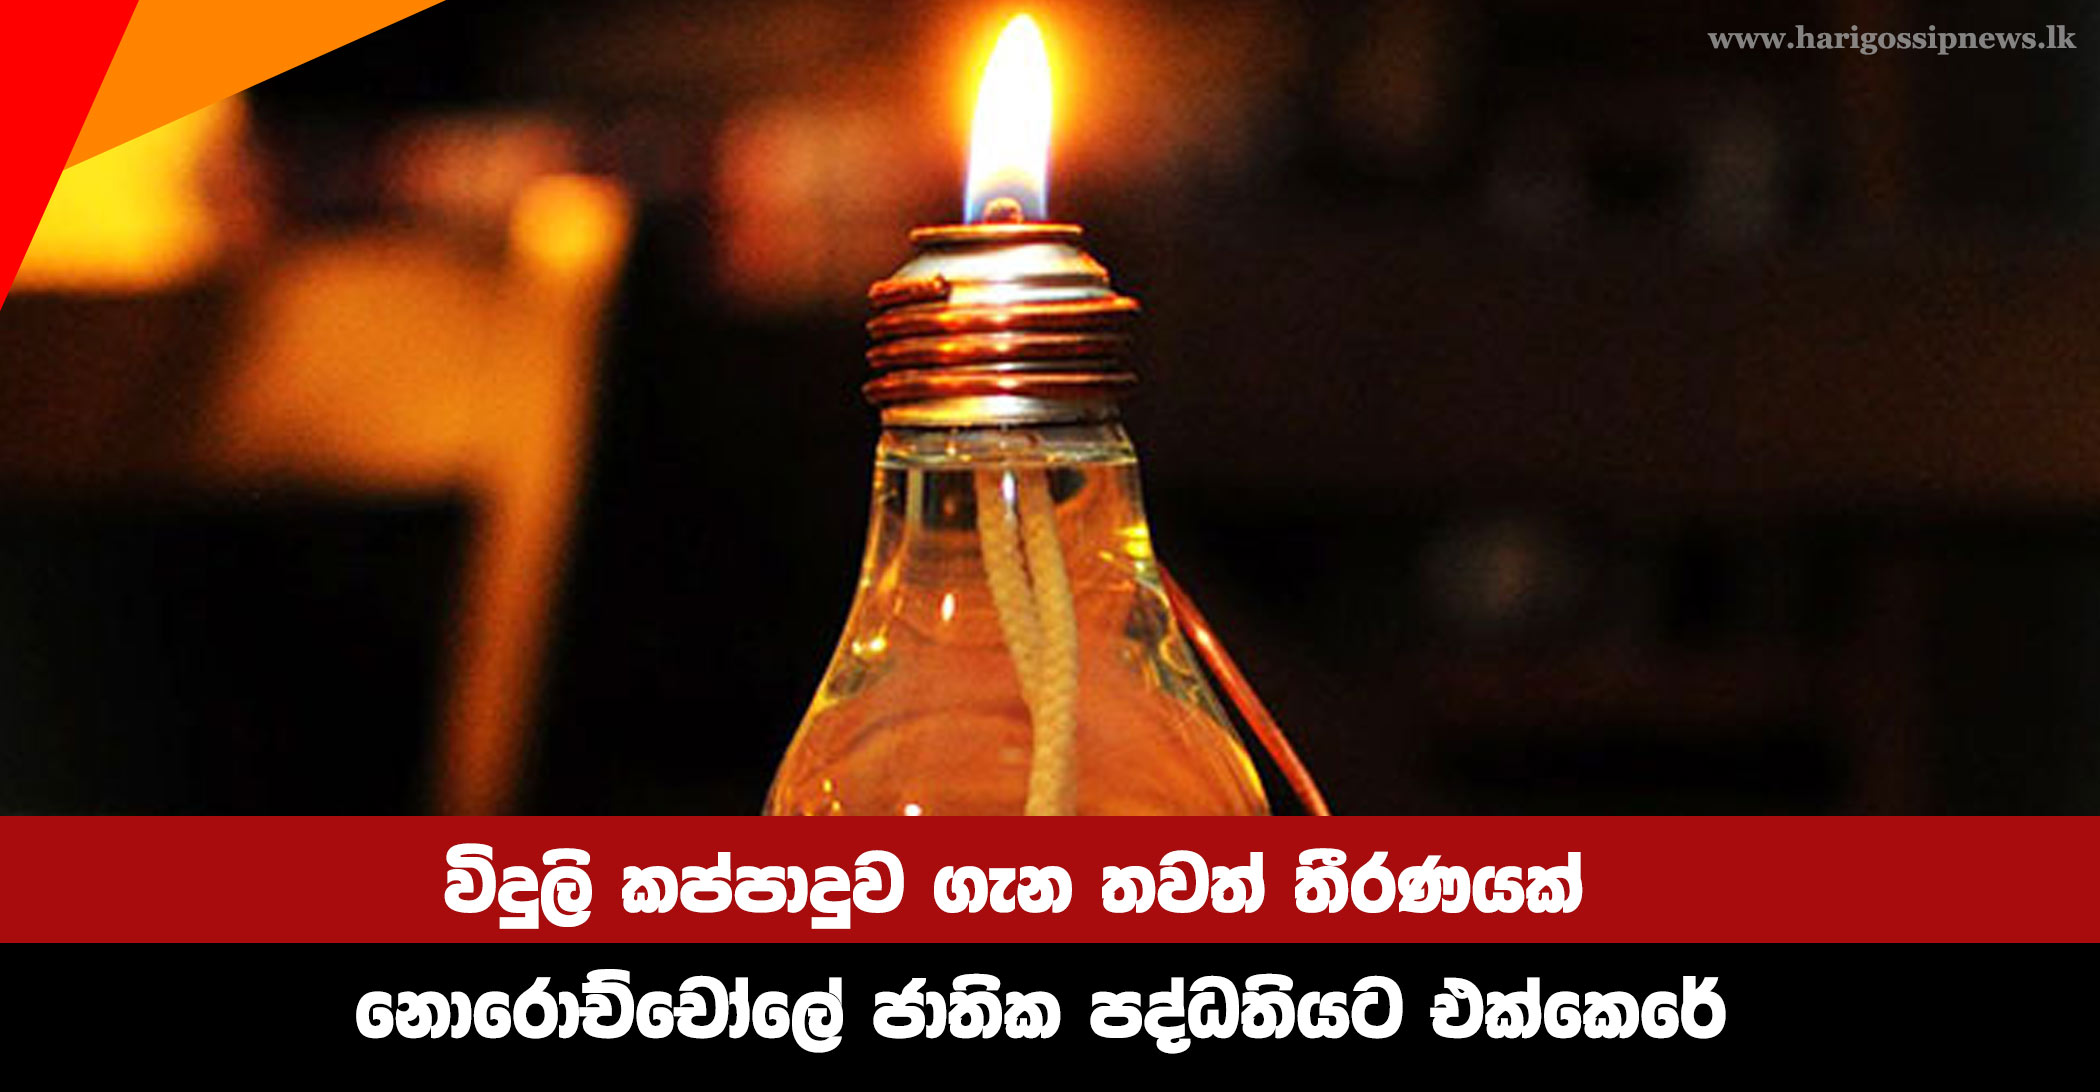 Another decision on power cuts - Norochcholai joins national grid